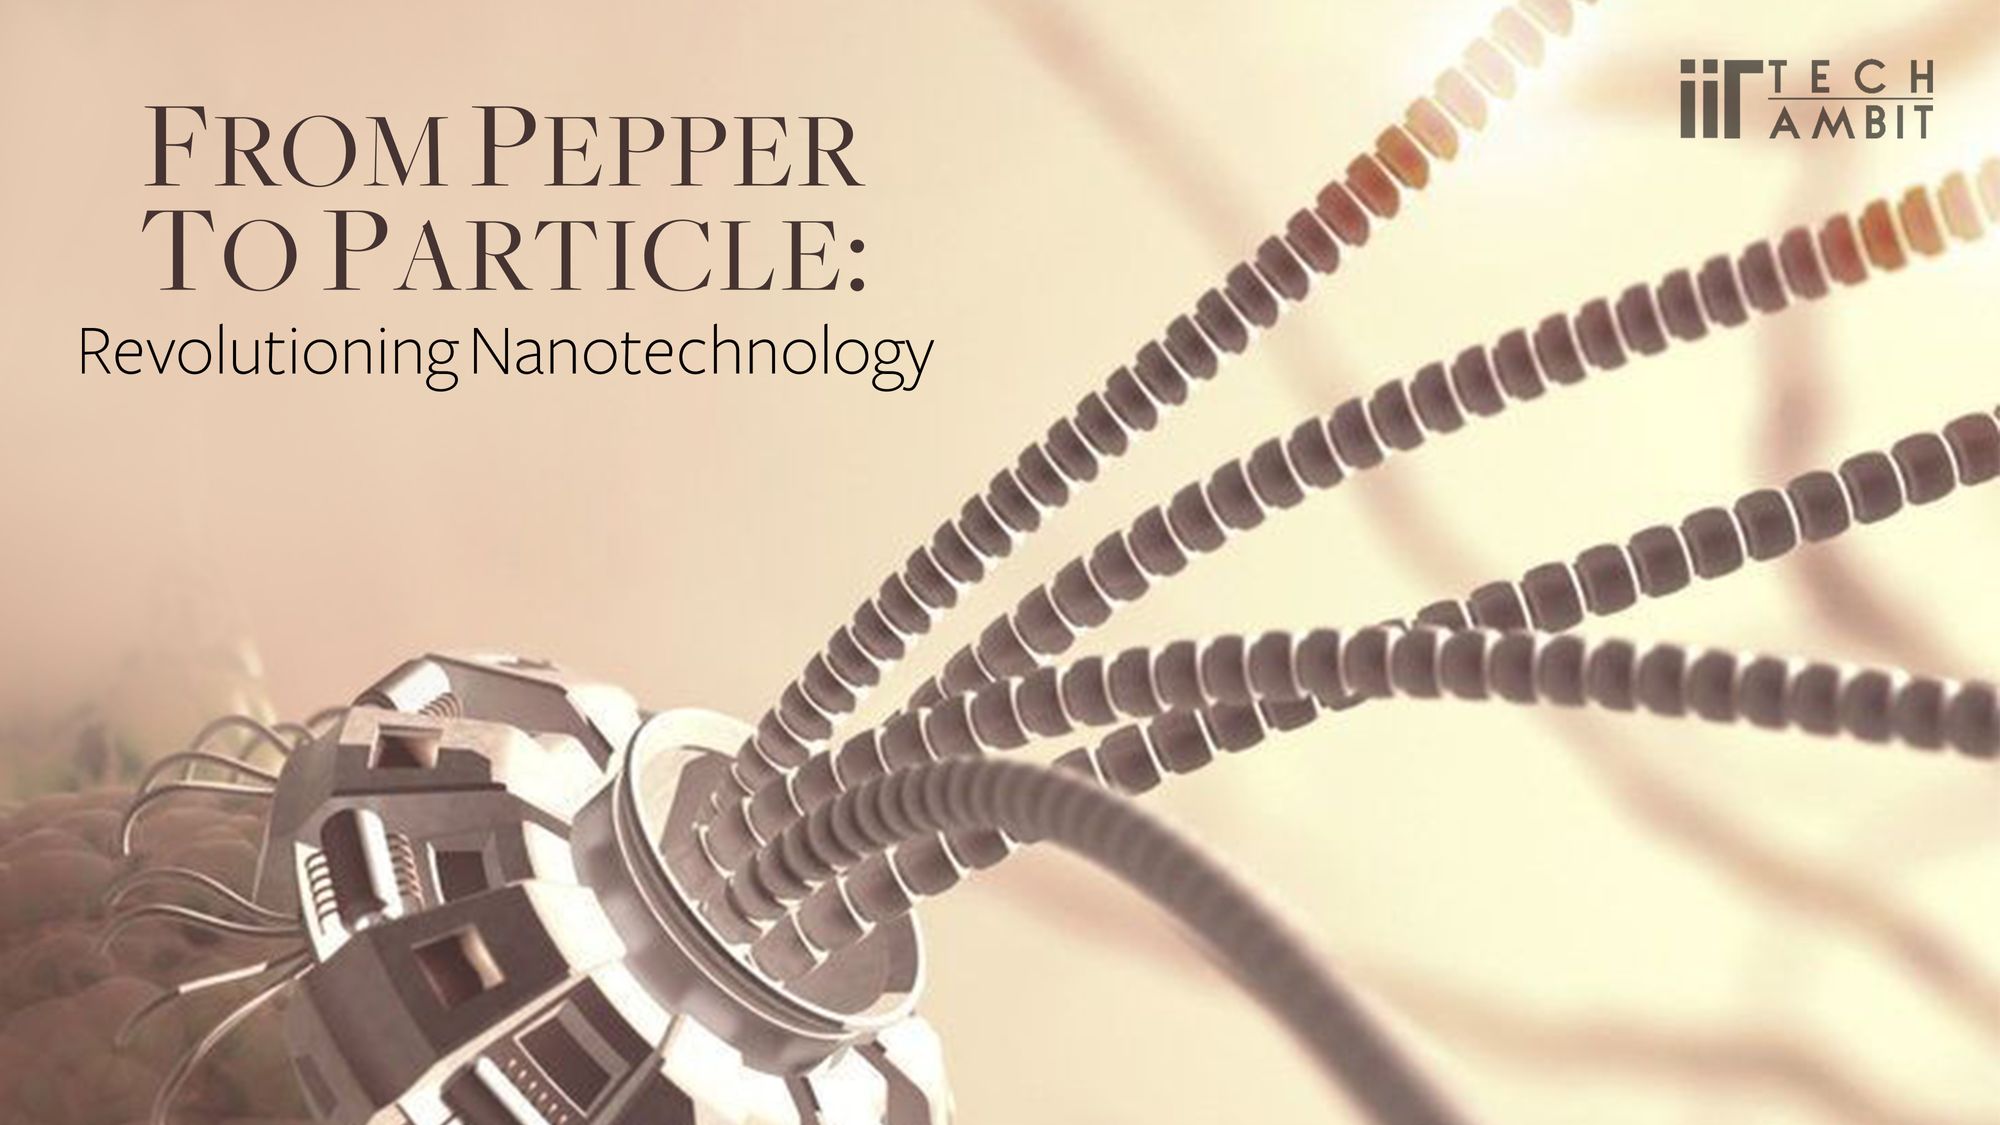 From pepper to particle: Revolutionising Nanotechnology